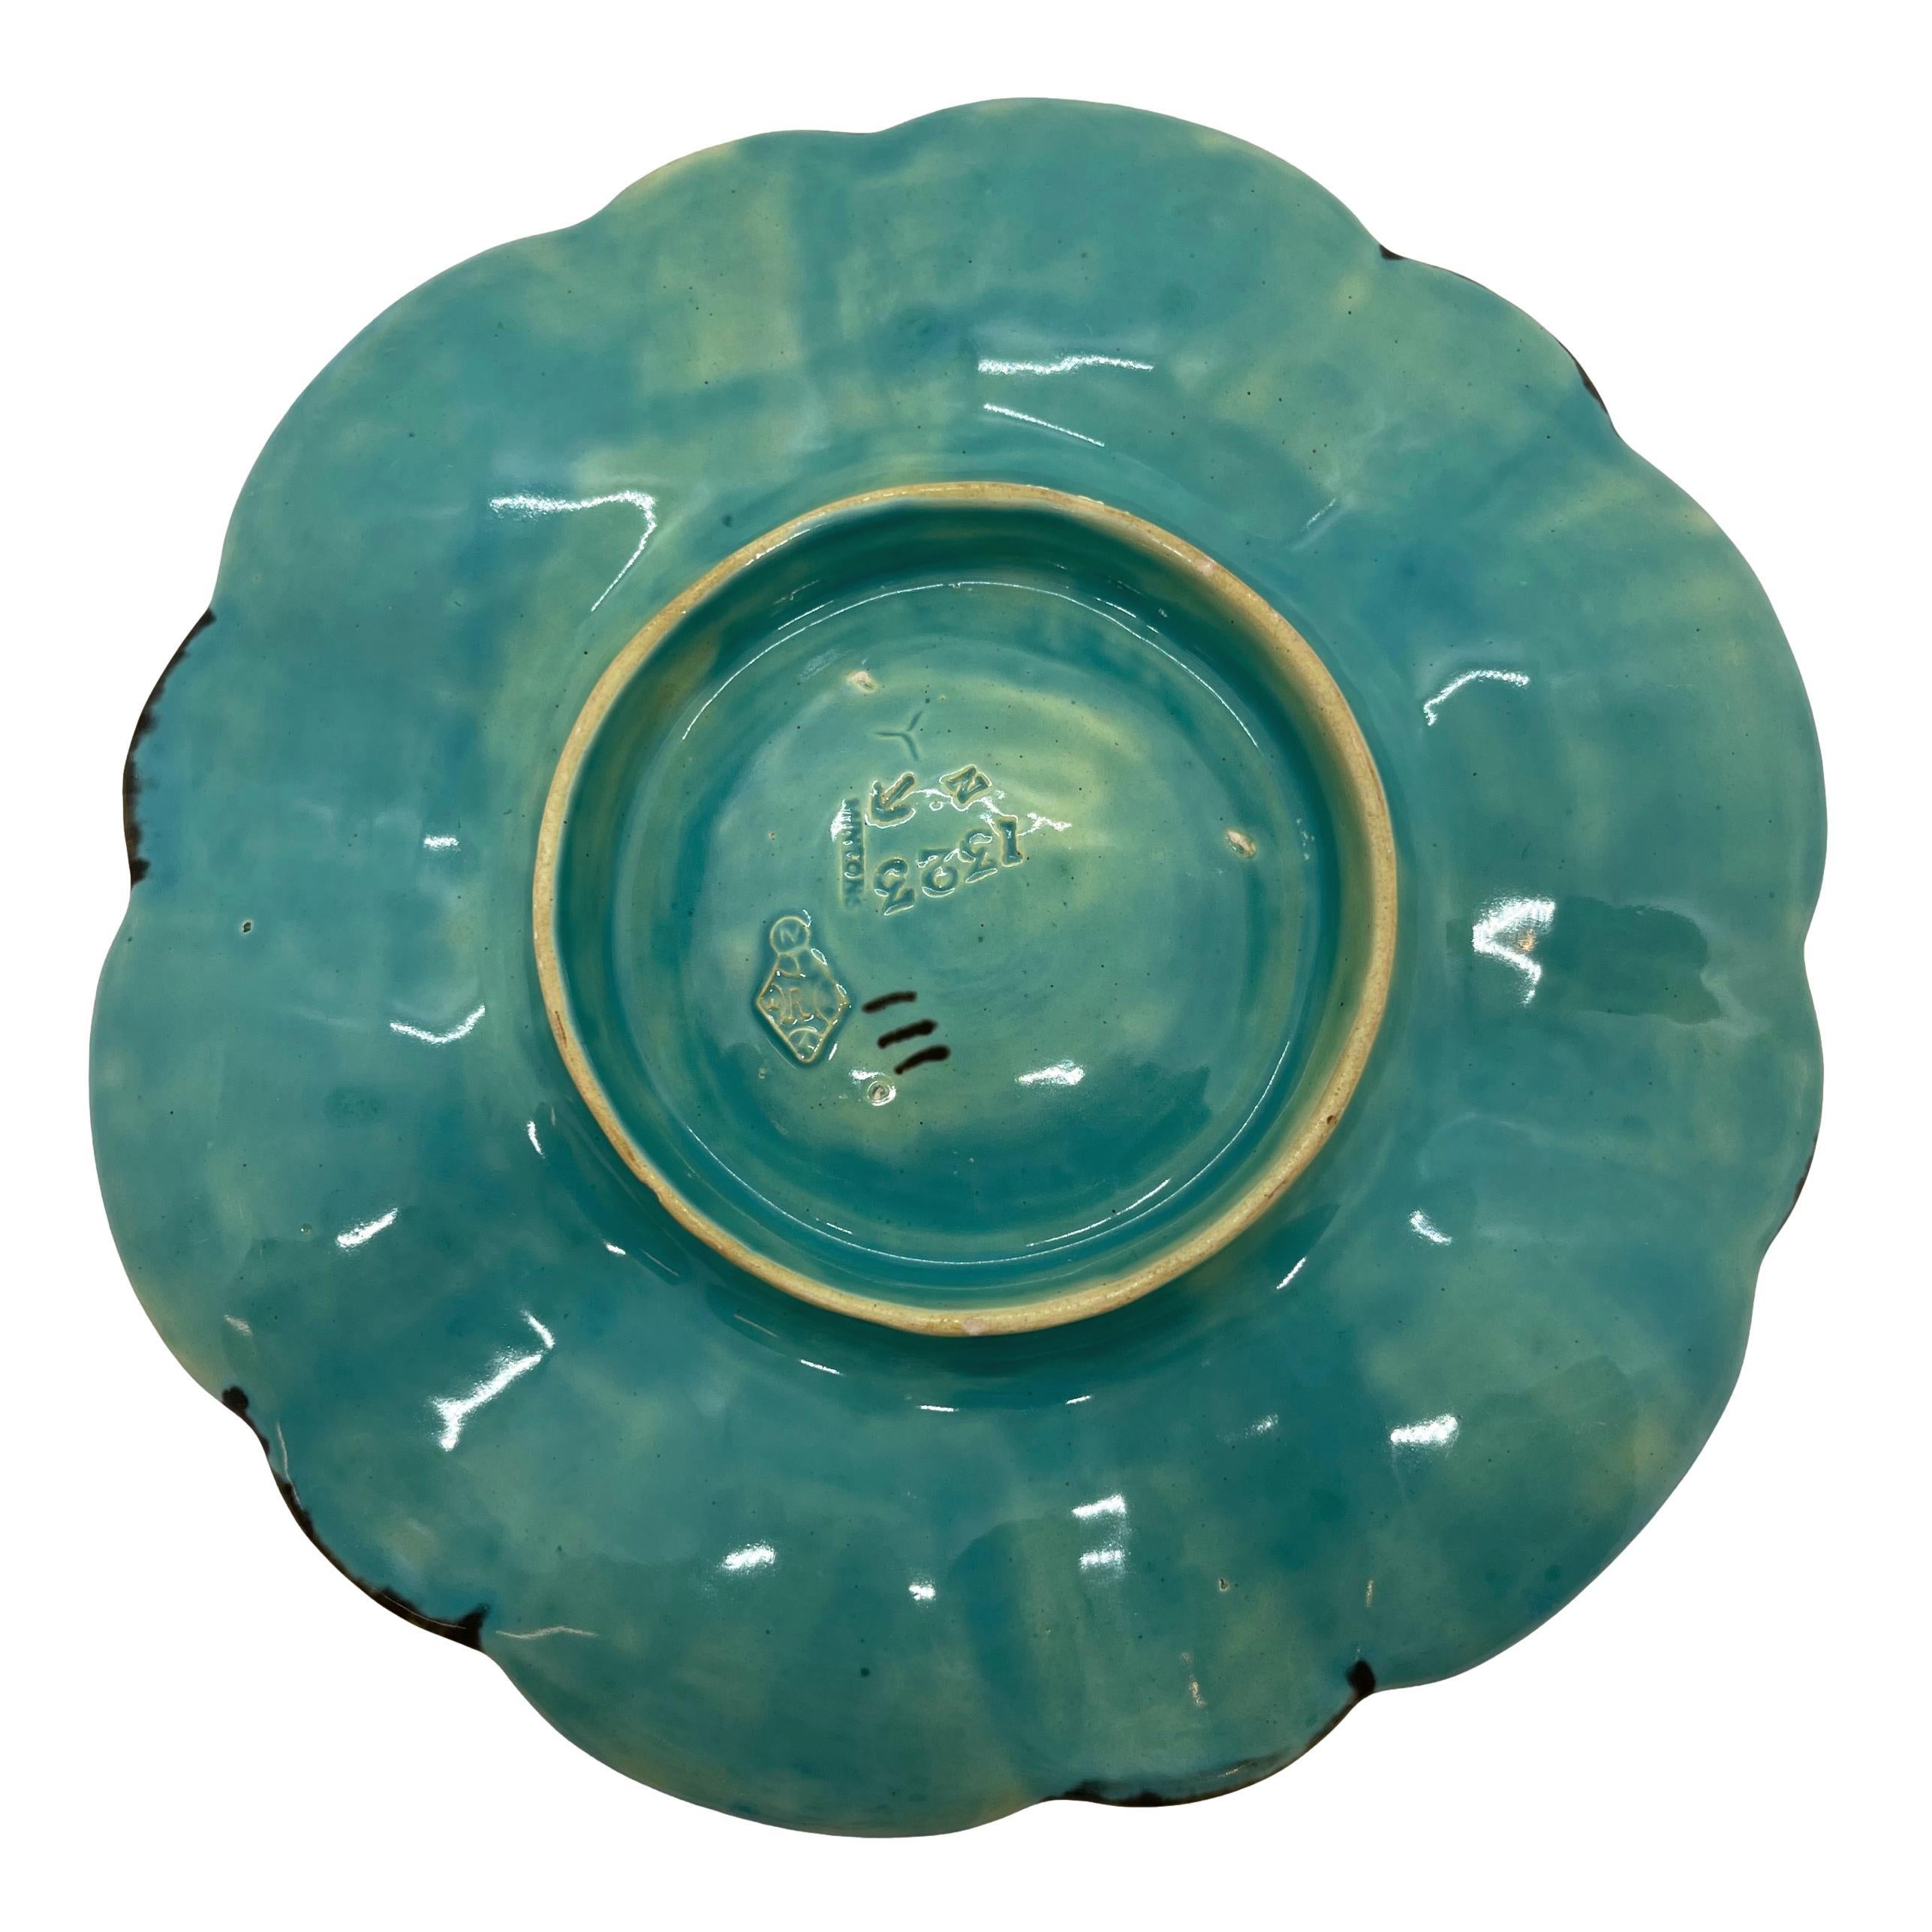 Minton Majolica Turquoise Six Well Oyster Plate, English, Dated 1874 1